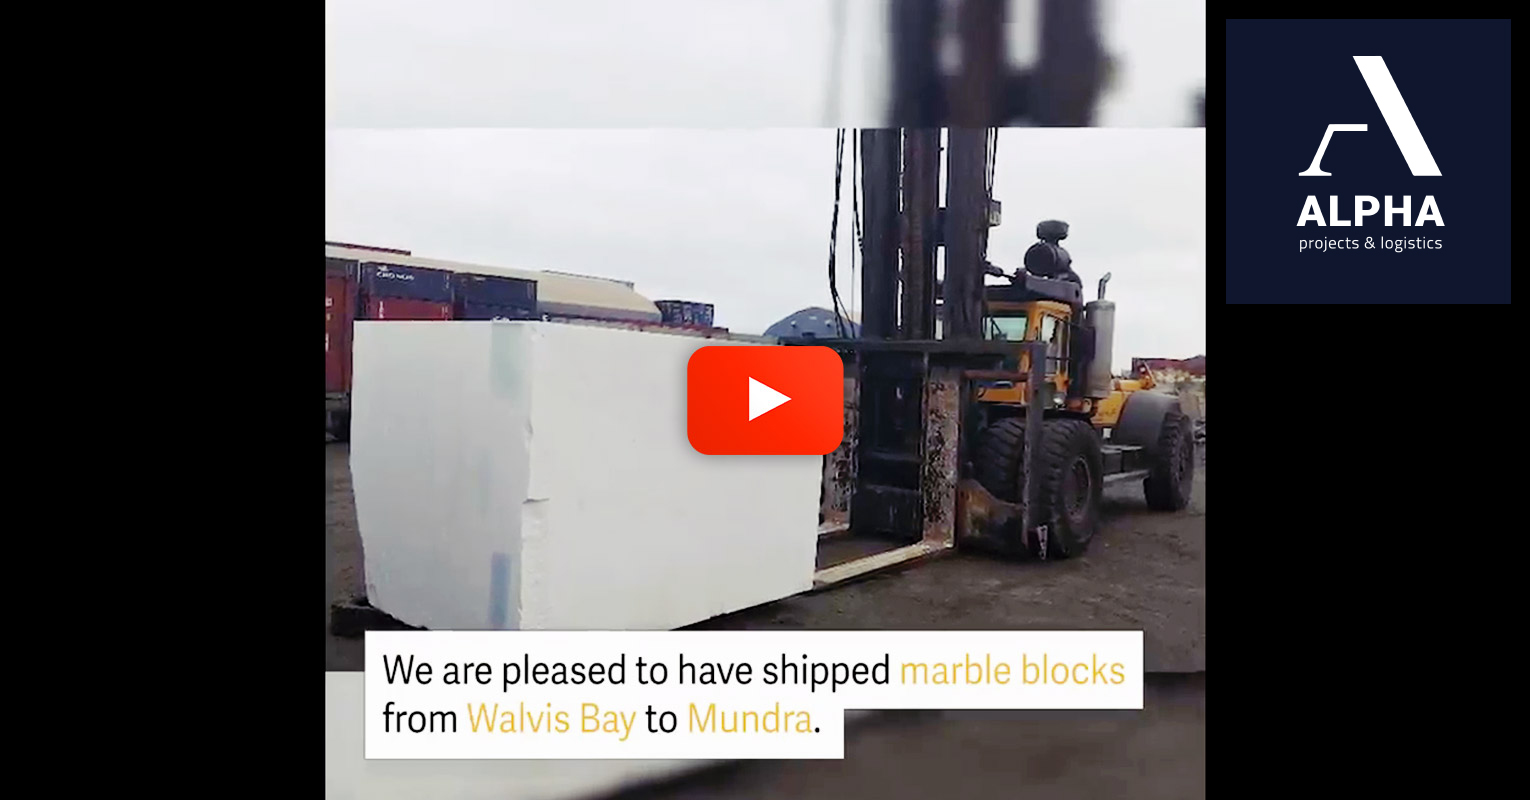 Video - Alpha Projects & Logistics Moved Marble Blocks from Walvis Bay Namibia to Mundra India